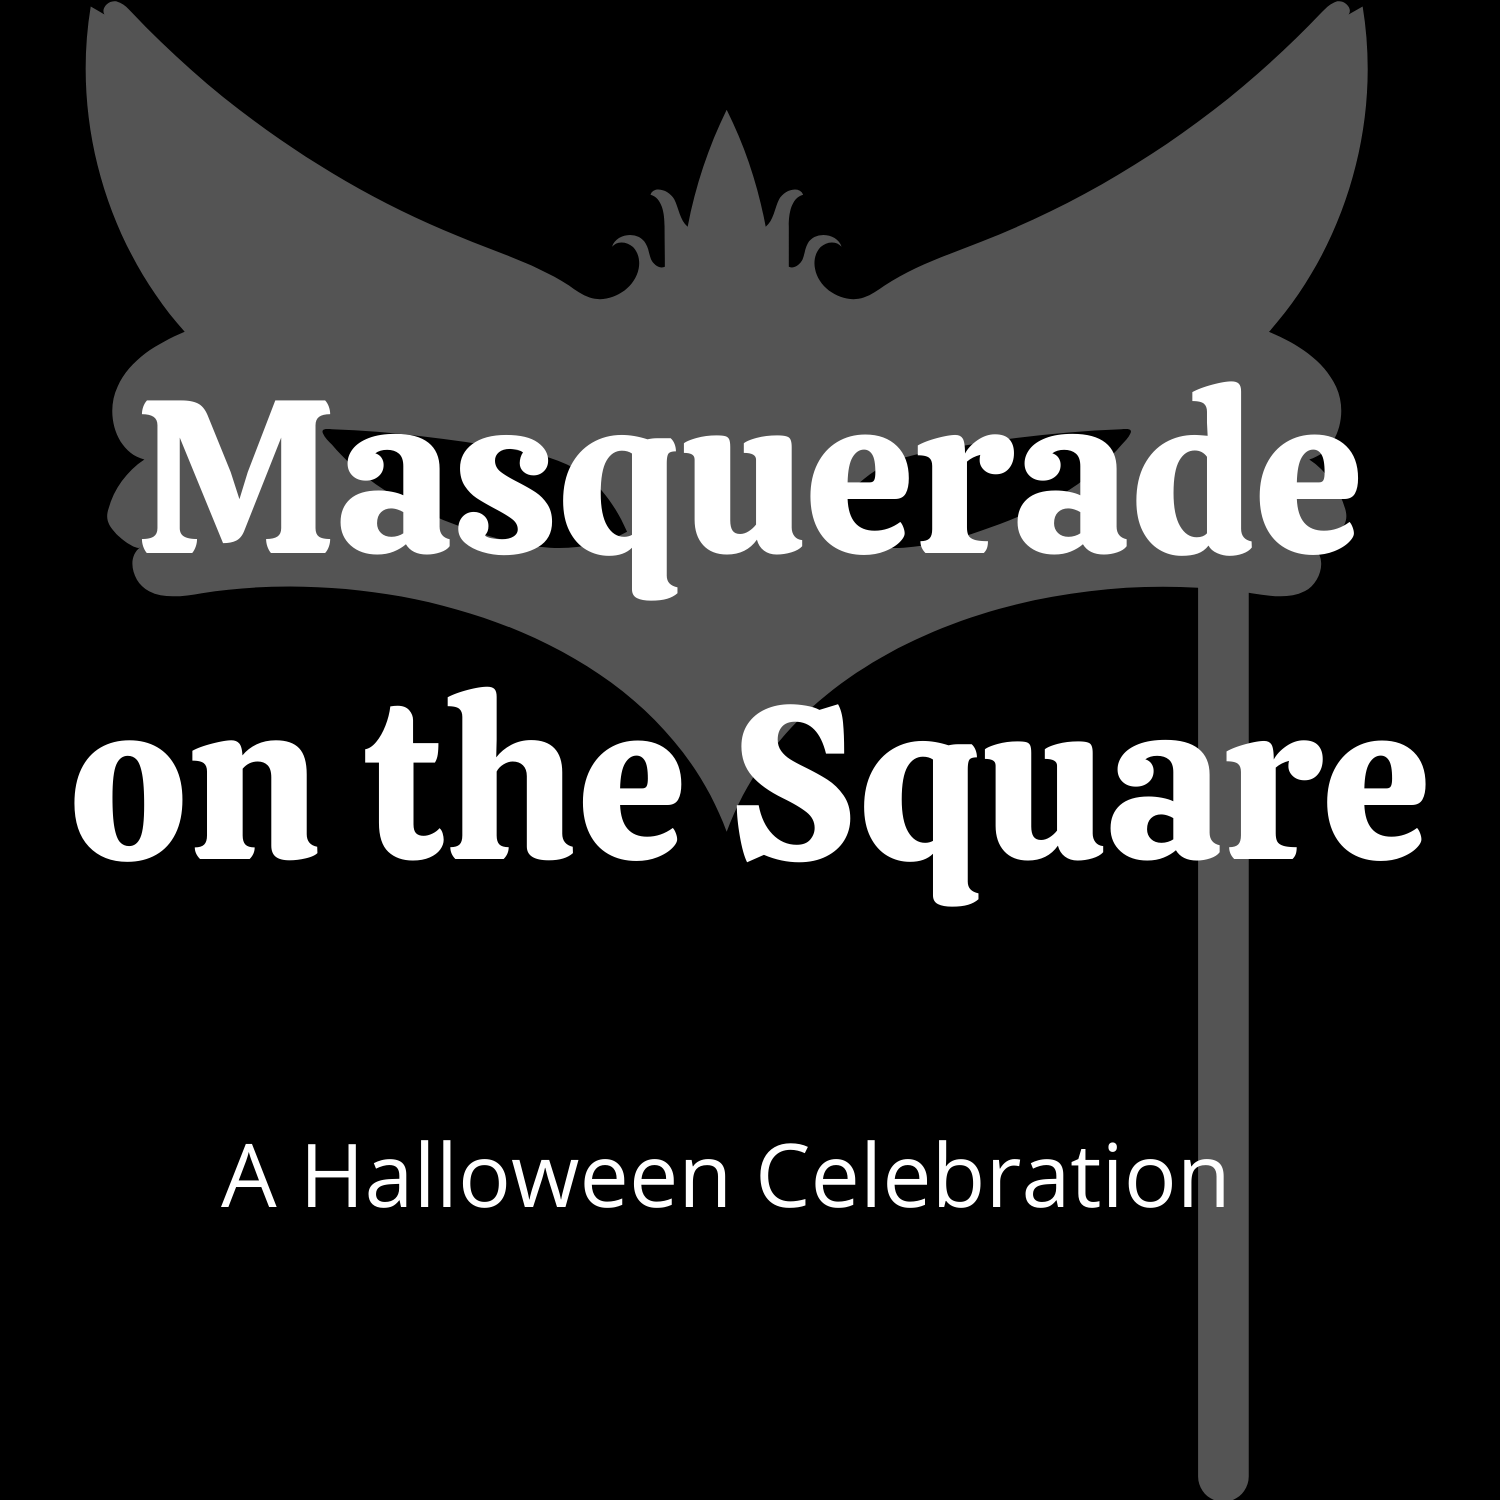 Halloween Masquerade on the Square